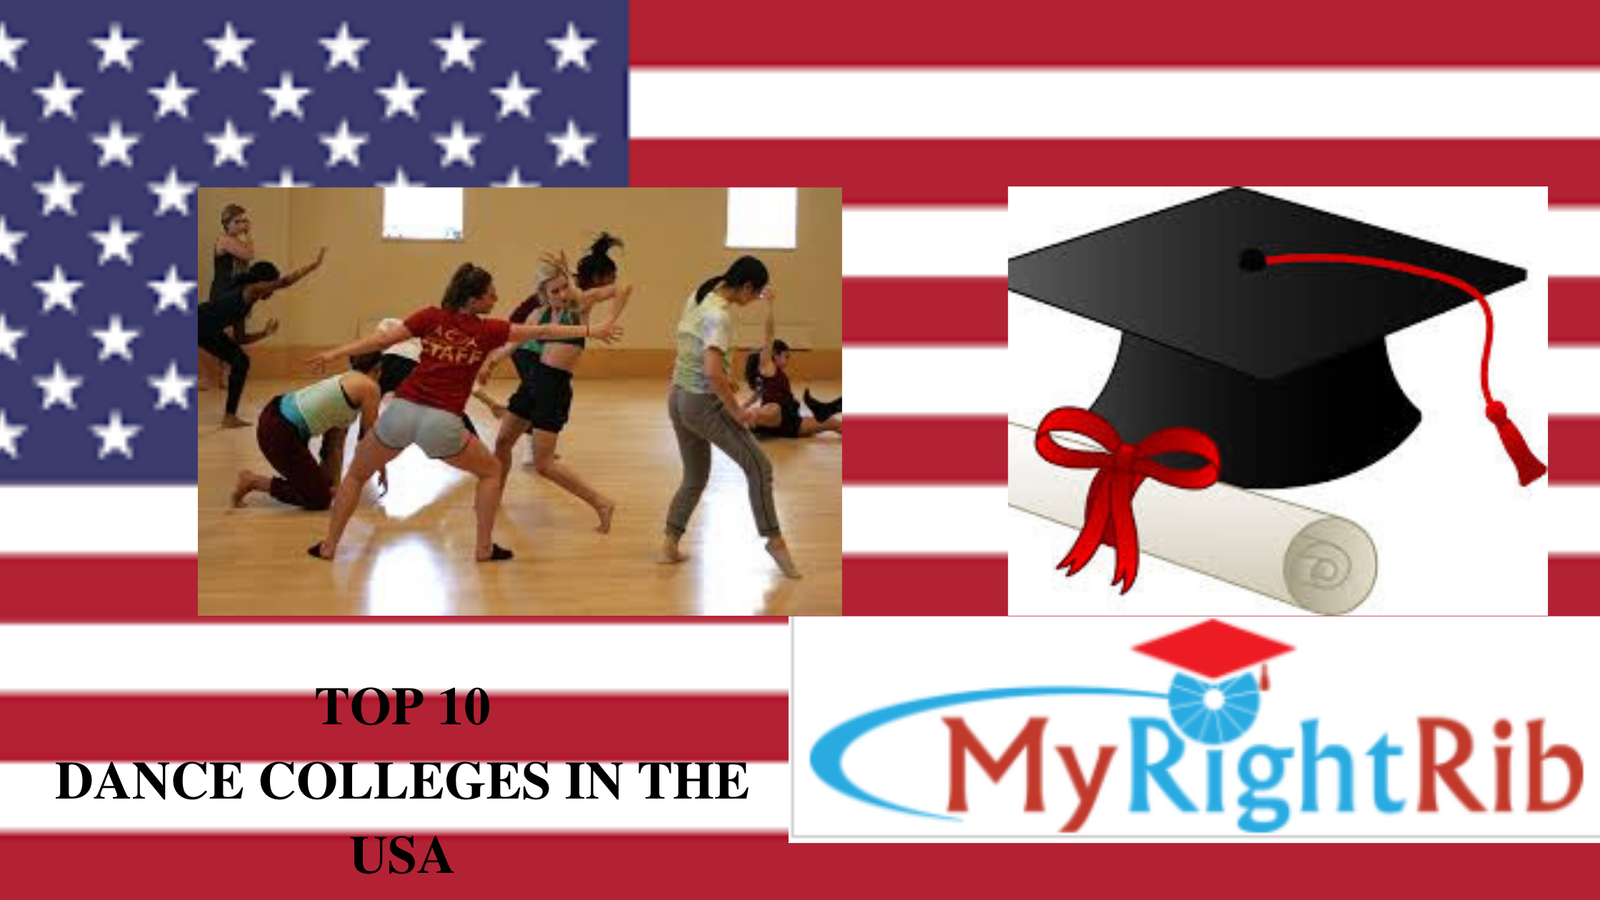 TOP 10 DANCE COLLEGES IN THE USA